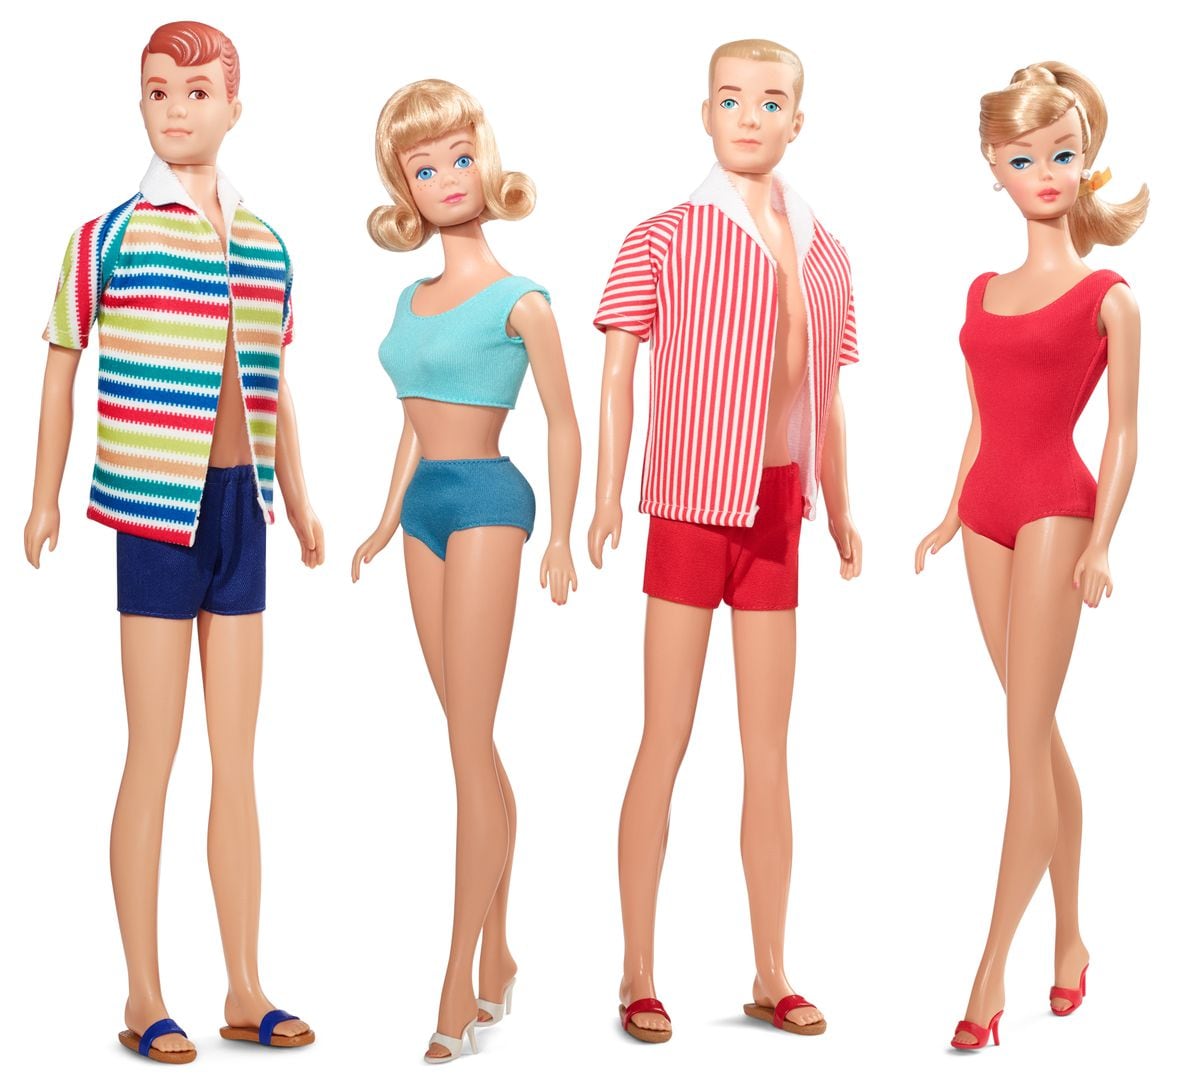 From A Doll Wanted By The Fbi To A Sugar Daddy Ken These Are The Discontinued Mattel Toys That